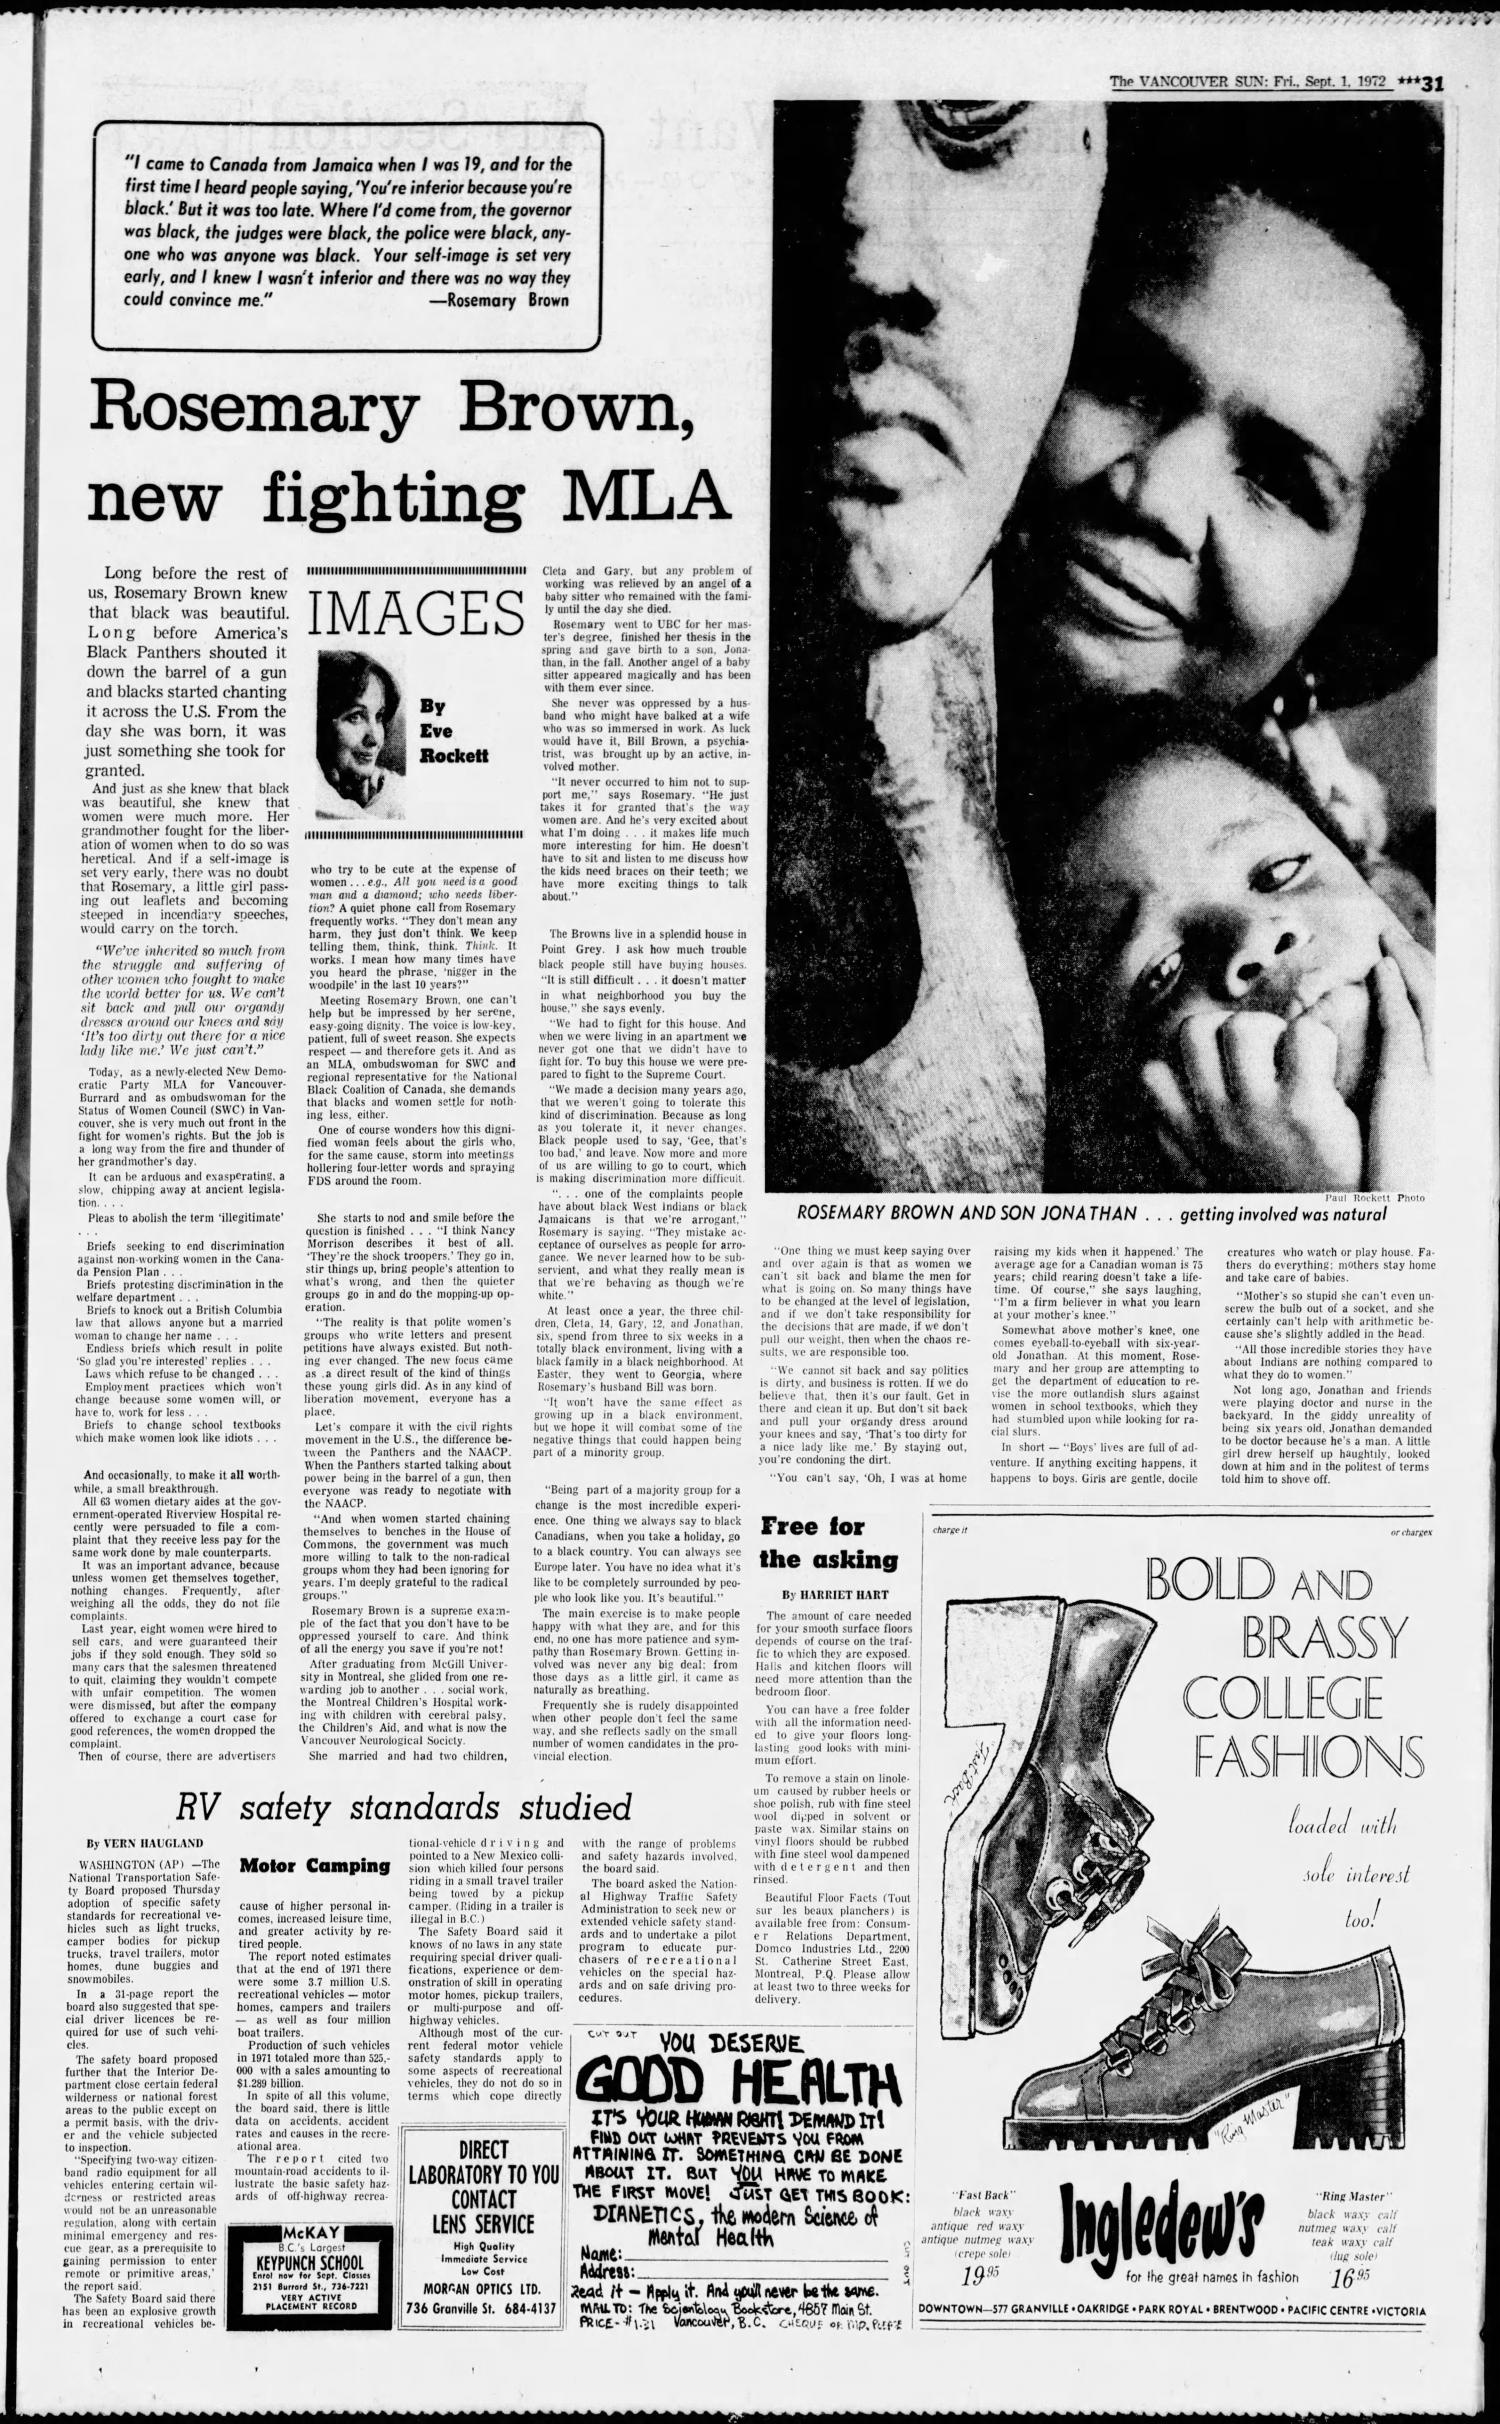 Vancouver Sun article on Rosemary Brown’s historic 1972 win.